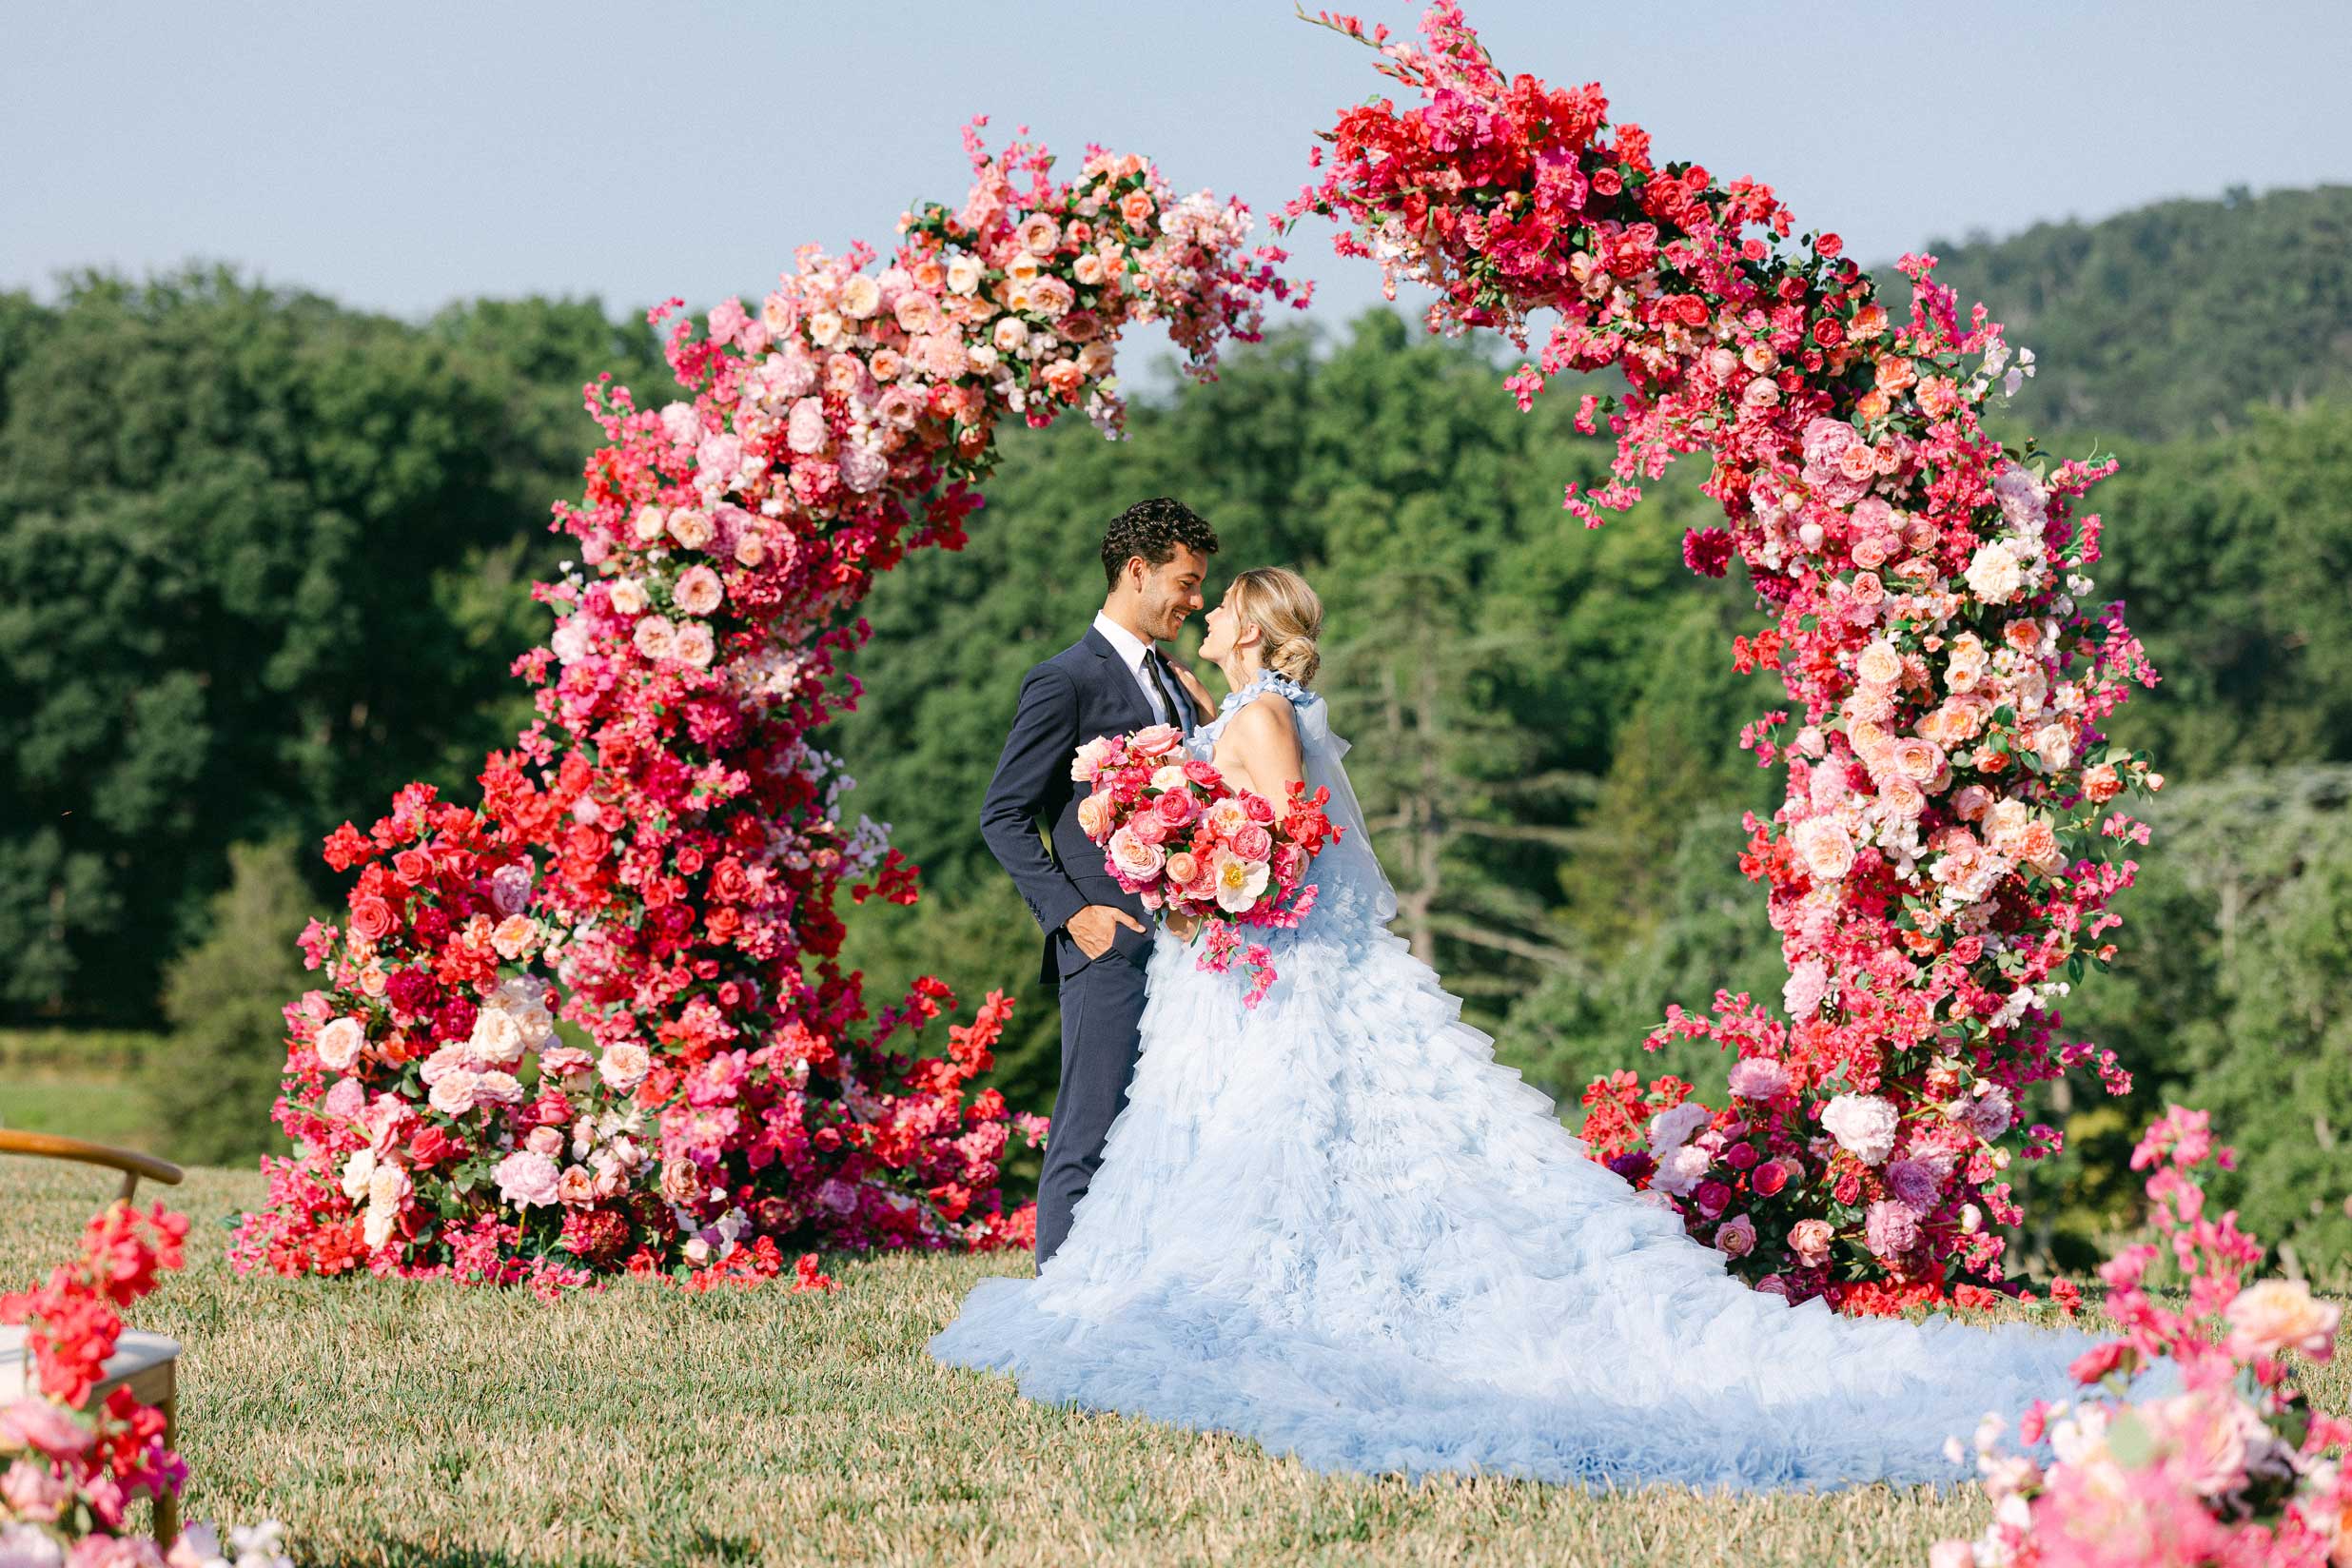 The happy couple poses in front of a stunning floral arch, the bride holding a bouquet and the groom looking dapper in a suit. Timeless Wedding Photography.